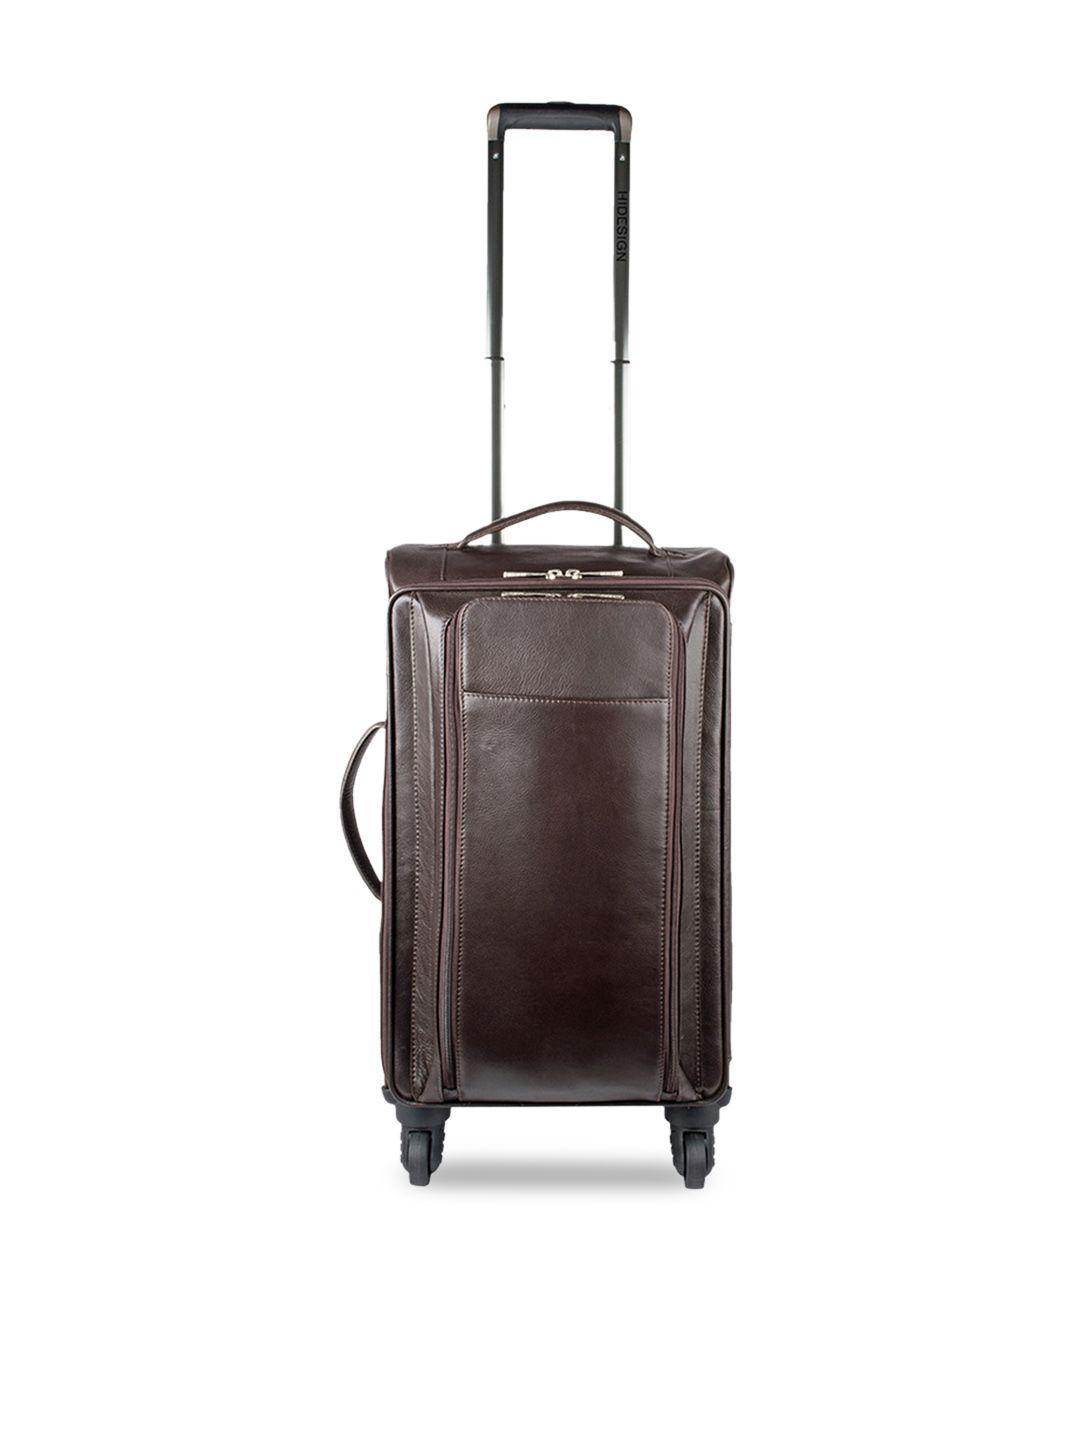 hidesign unisex brown solid leather large trolley suitcase